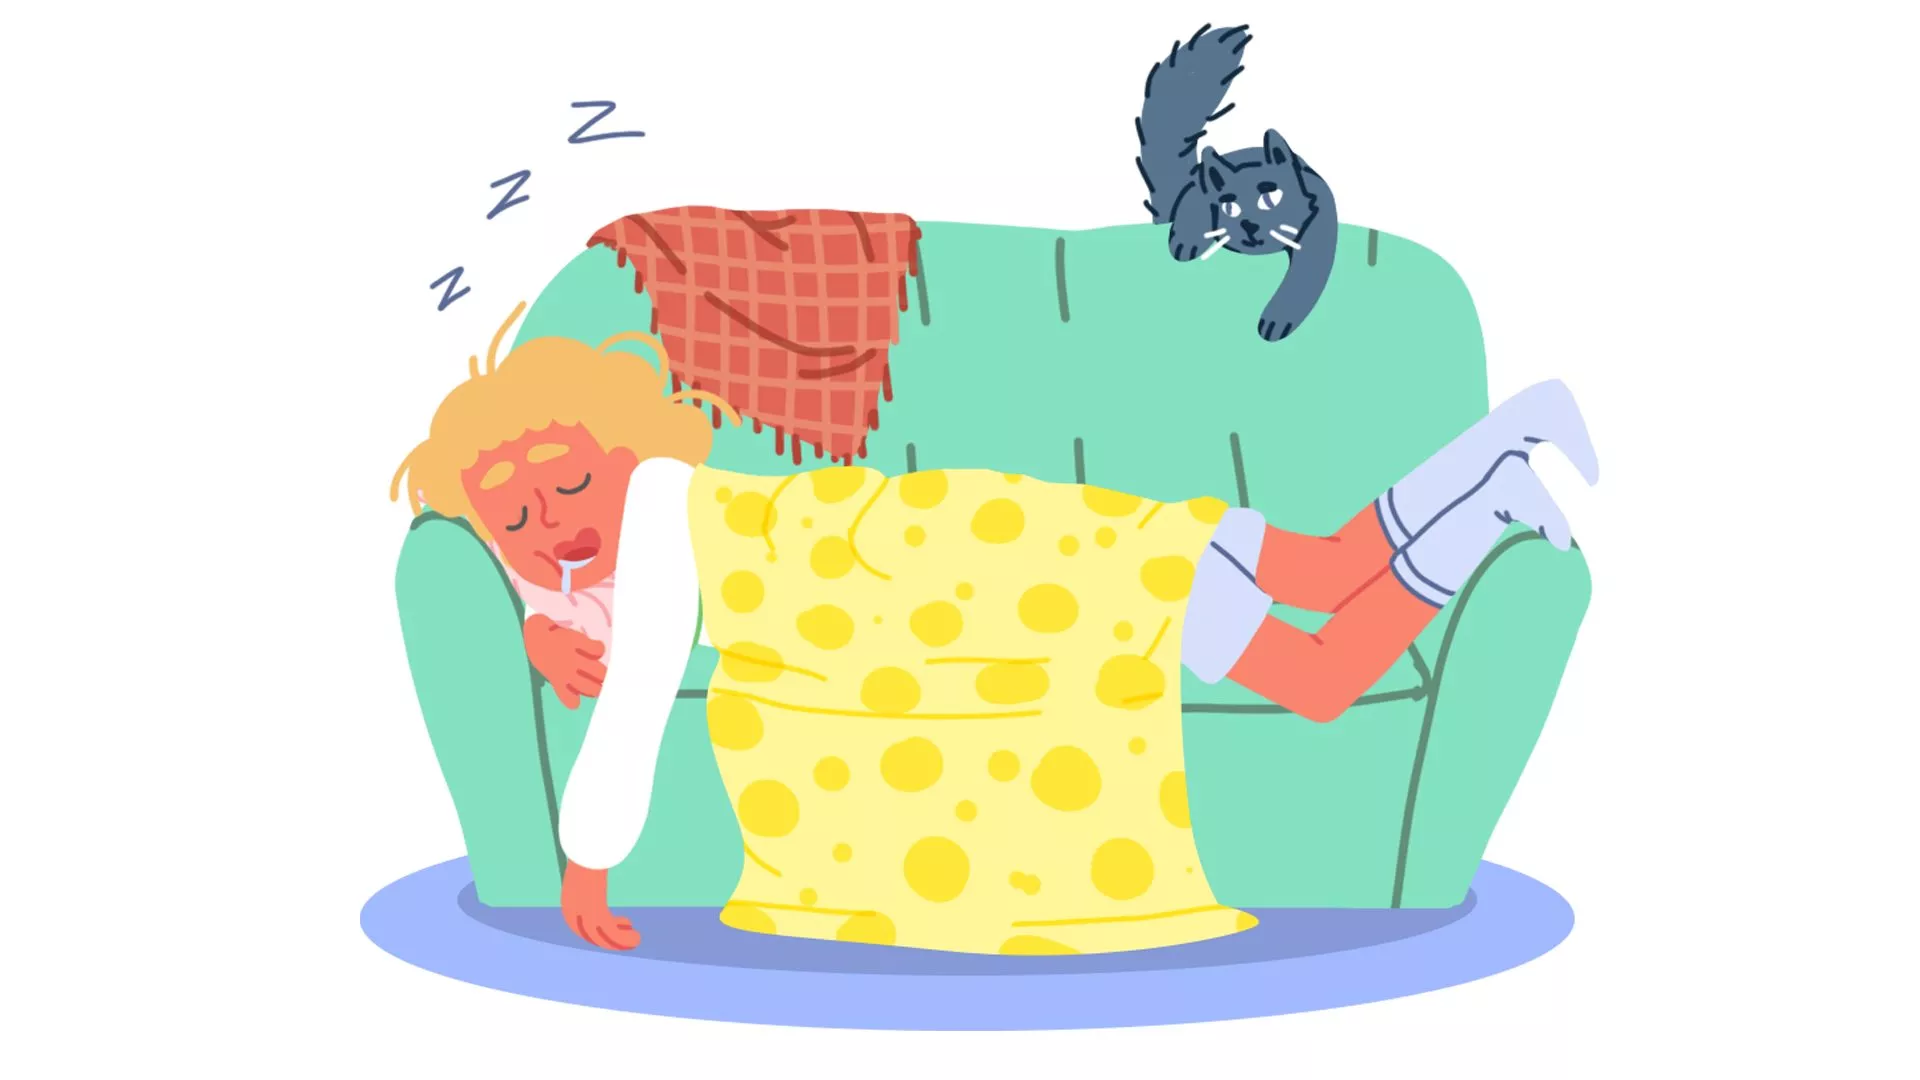 napping helps for artist burnout